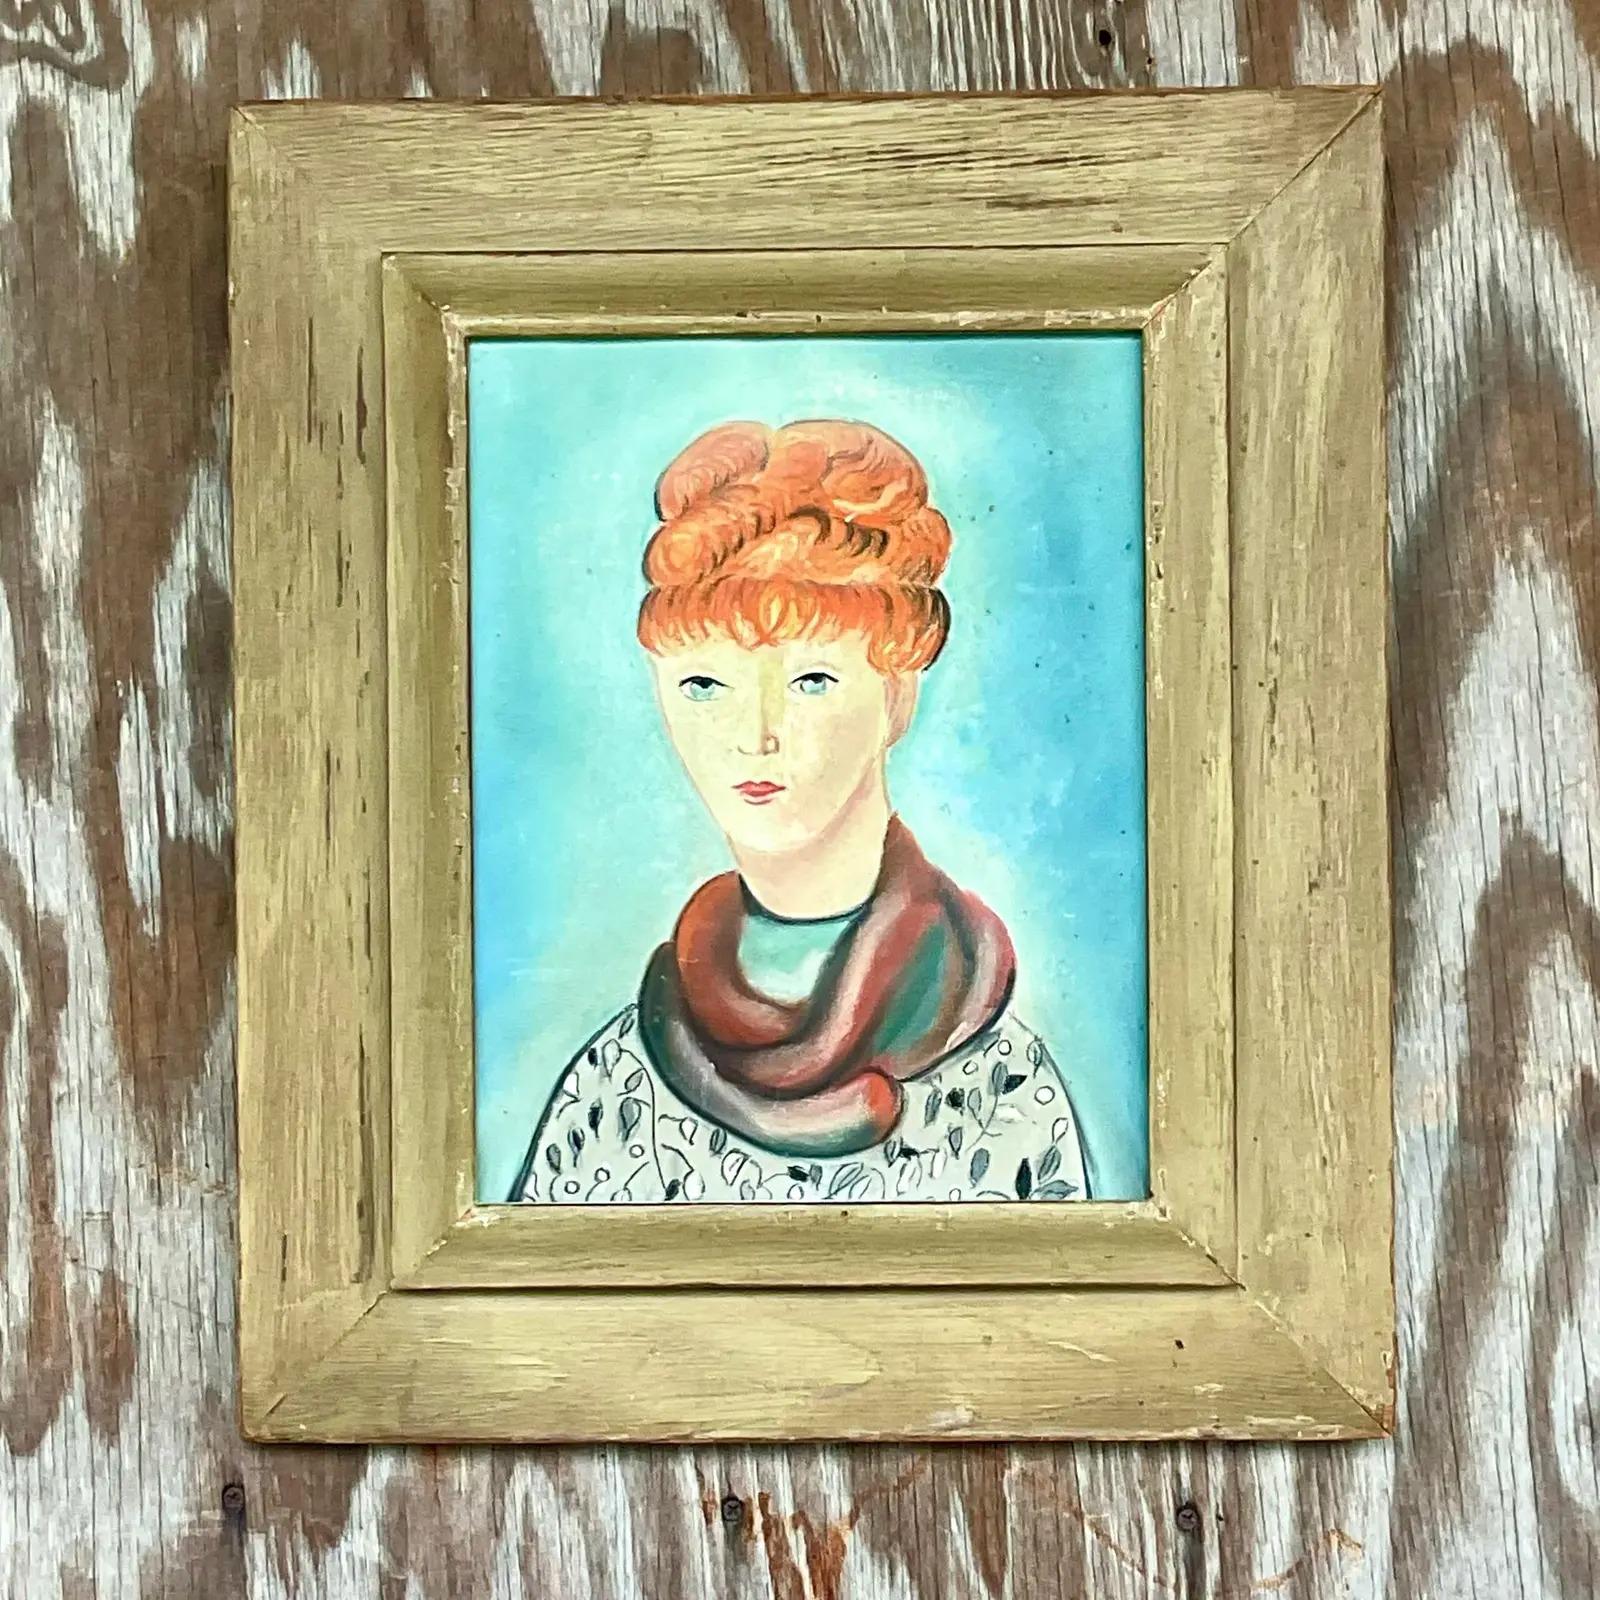 An exceptional vintage Original oil on canvas. A beautiful period composition of a stylish woman. Amazing color study. Acquired from a Palm Beach estate.

The painting is in great vintage condition. Minor scuffs and blemishes appropriate to its